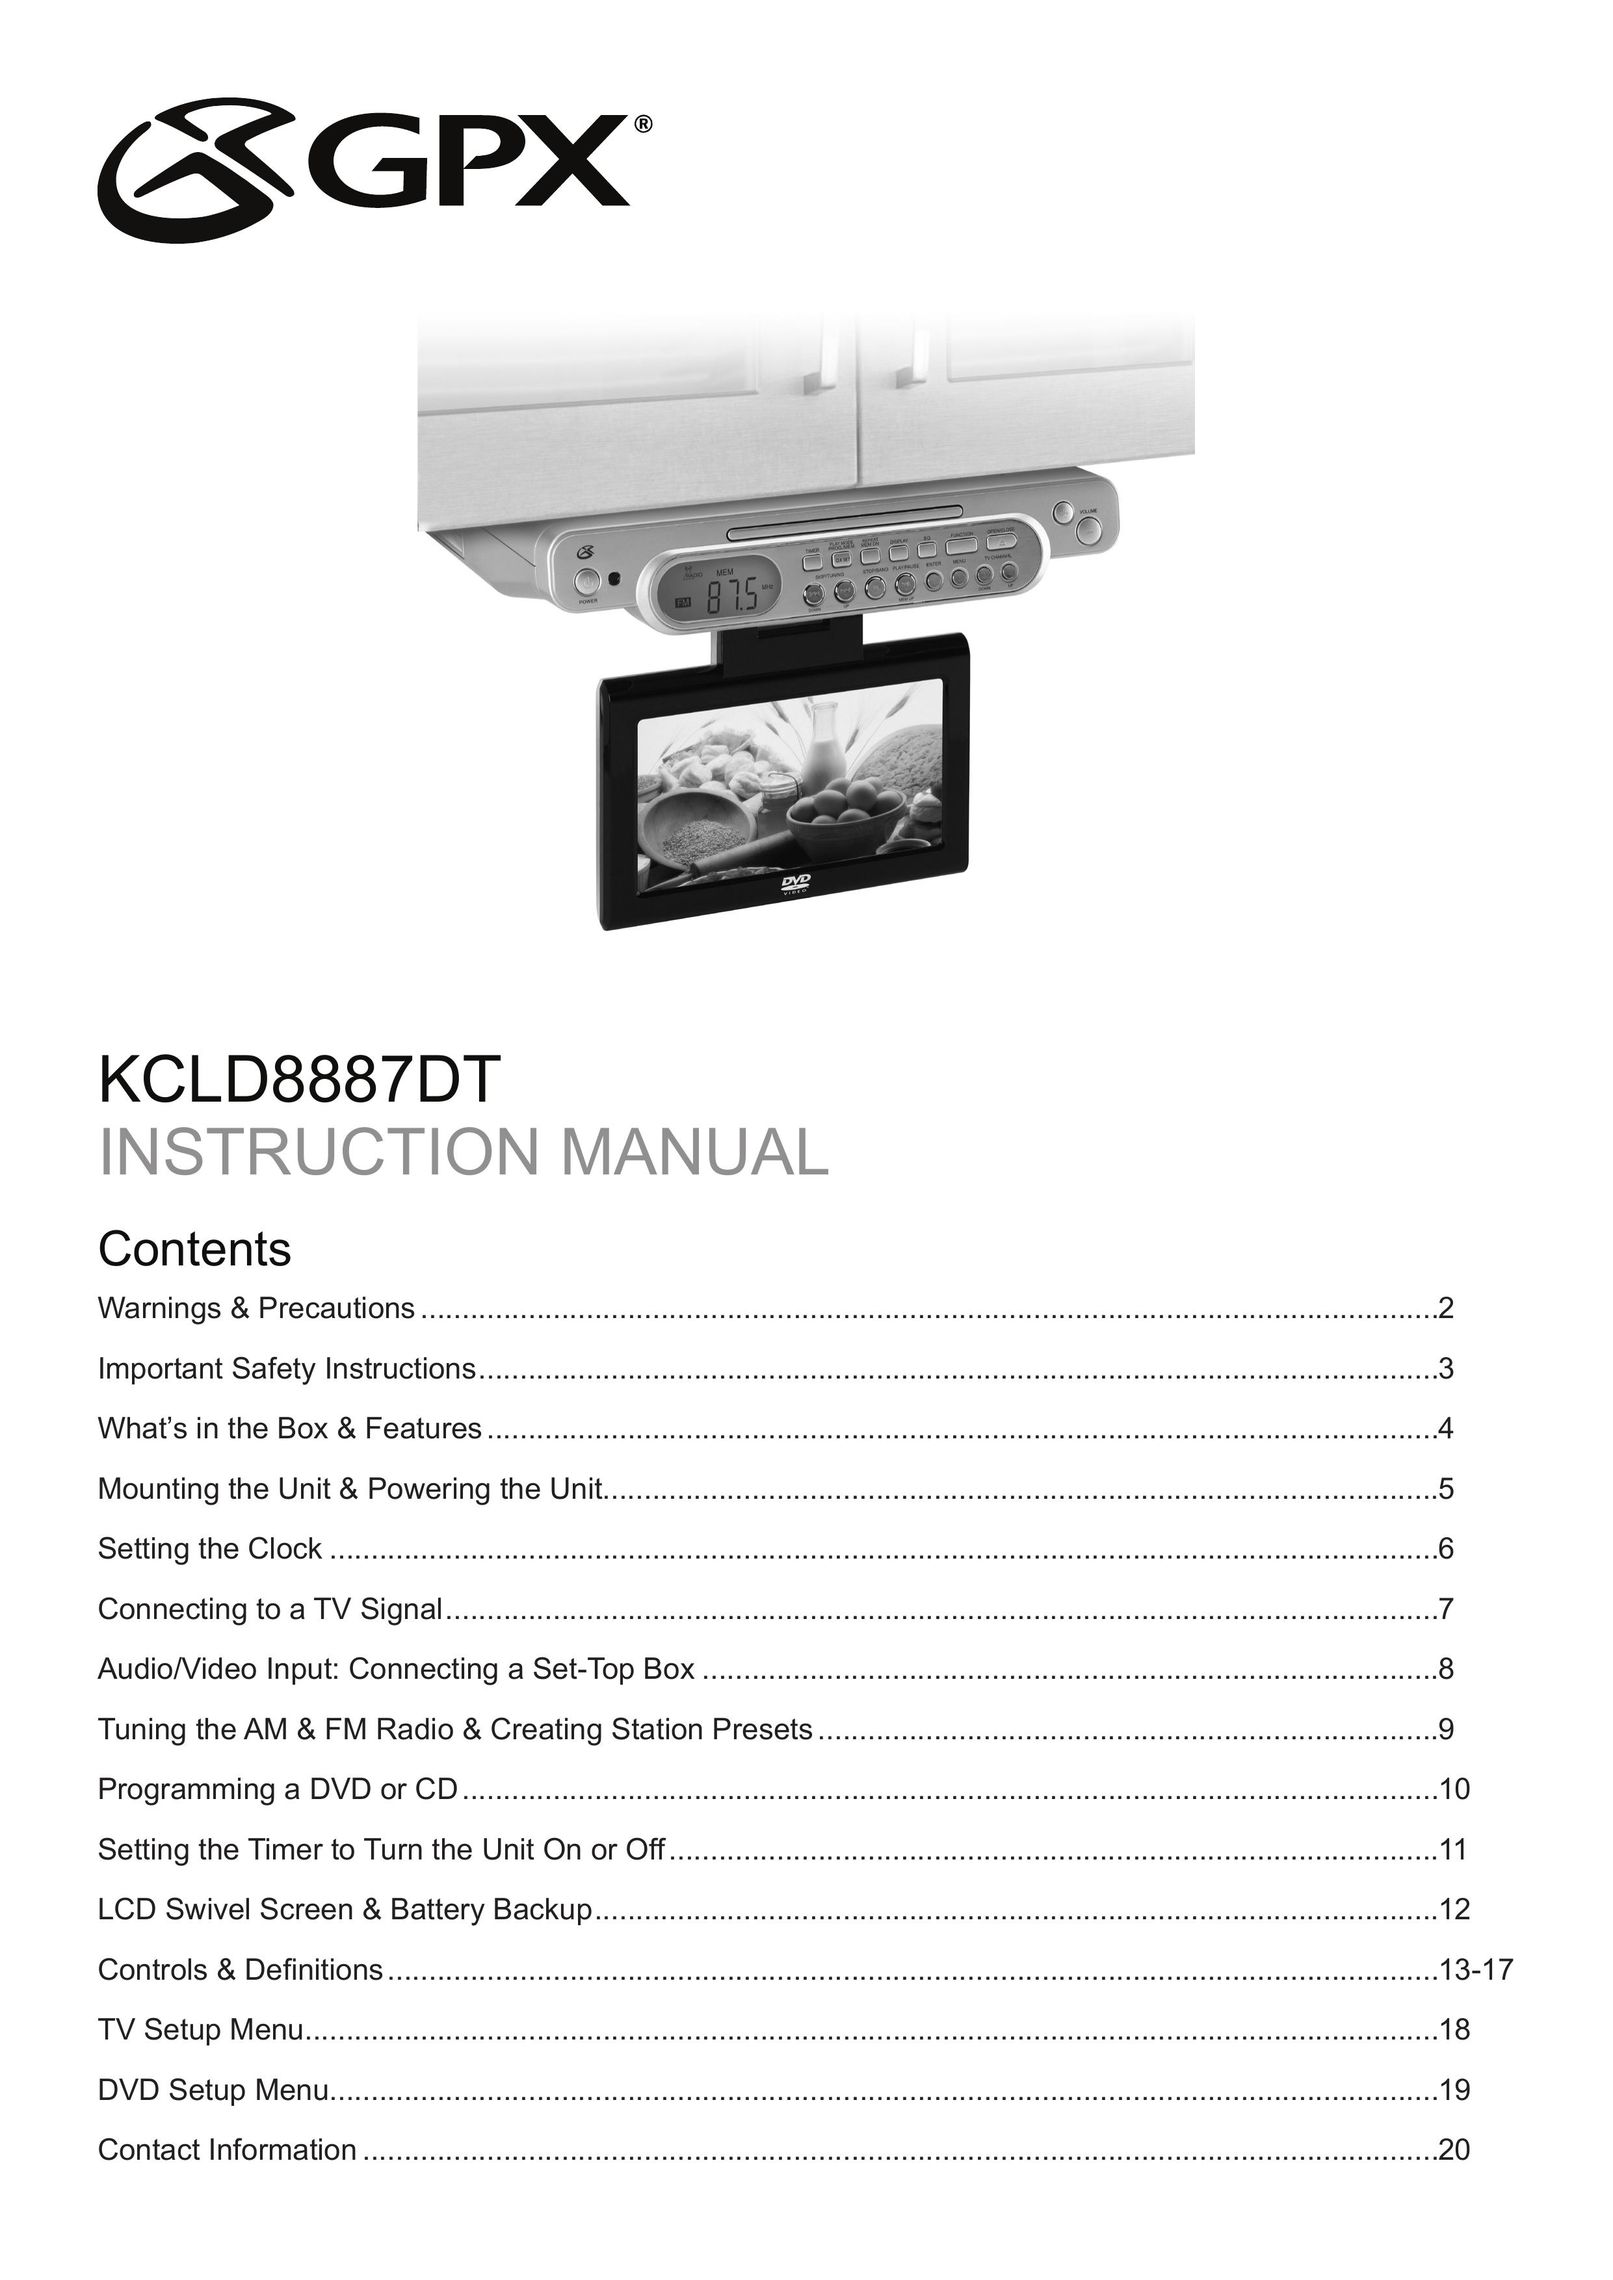 GPX KCLD8887DT TV DVD Combo User Manual